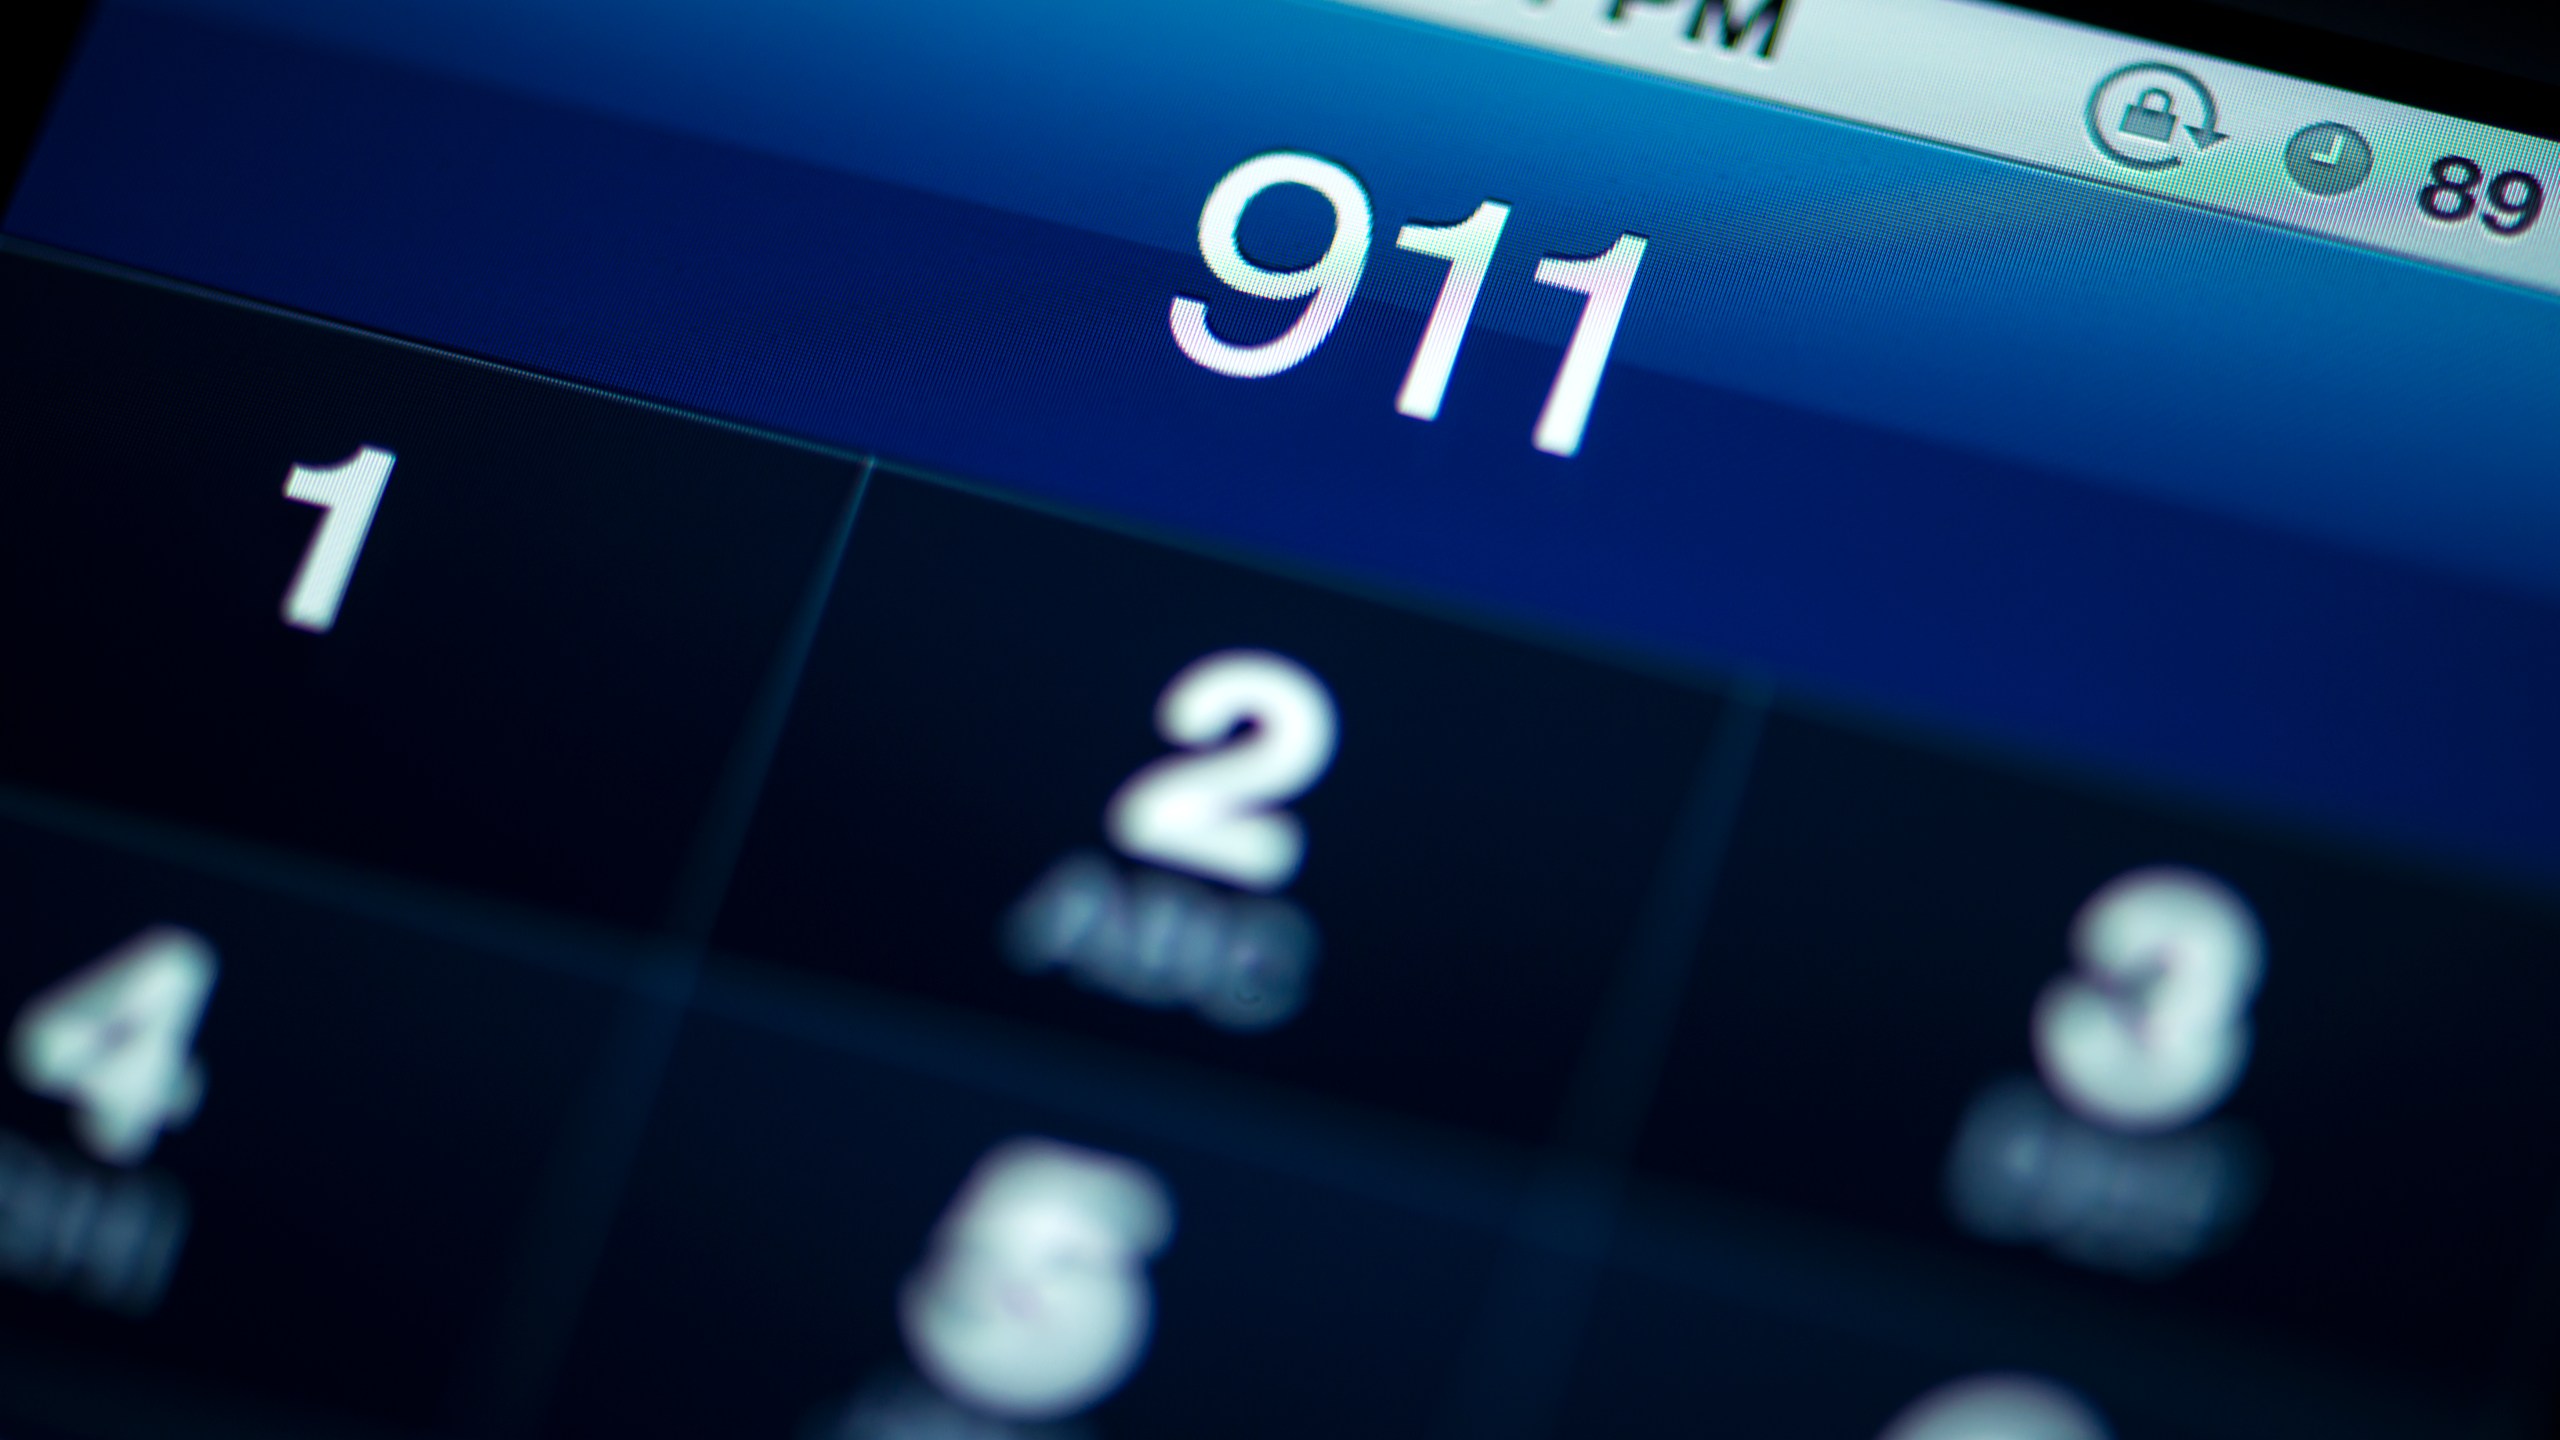 when-was-911-phone-number-created